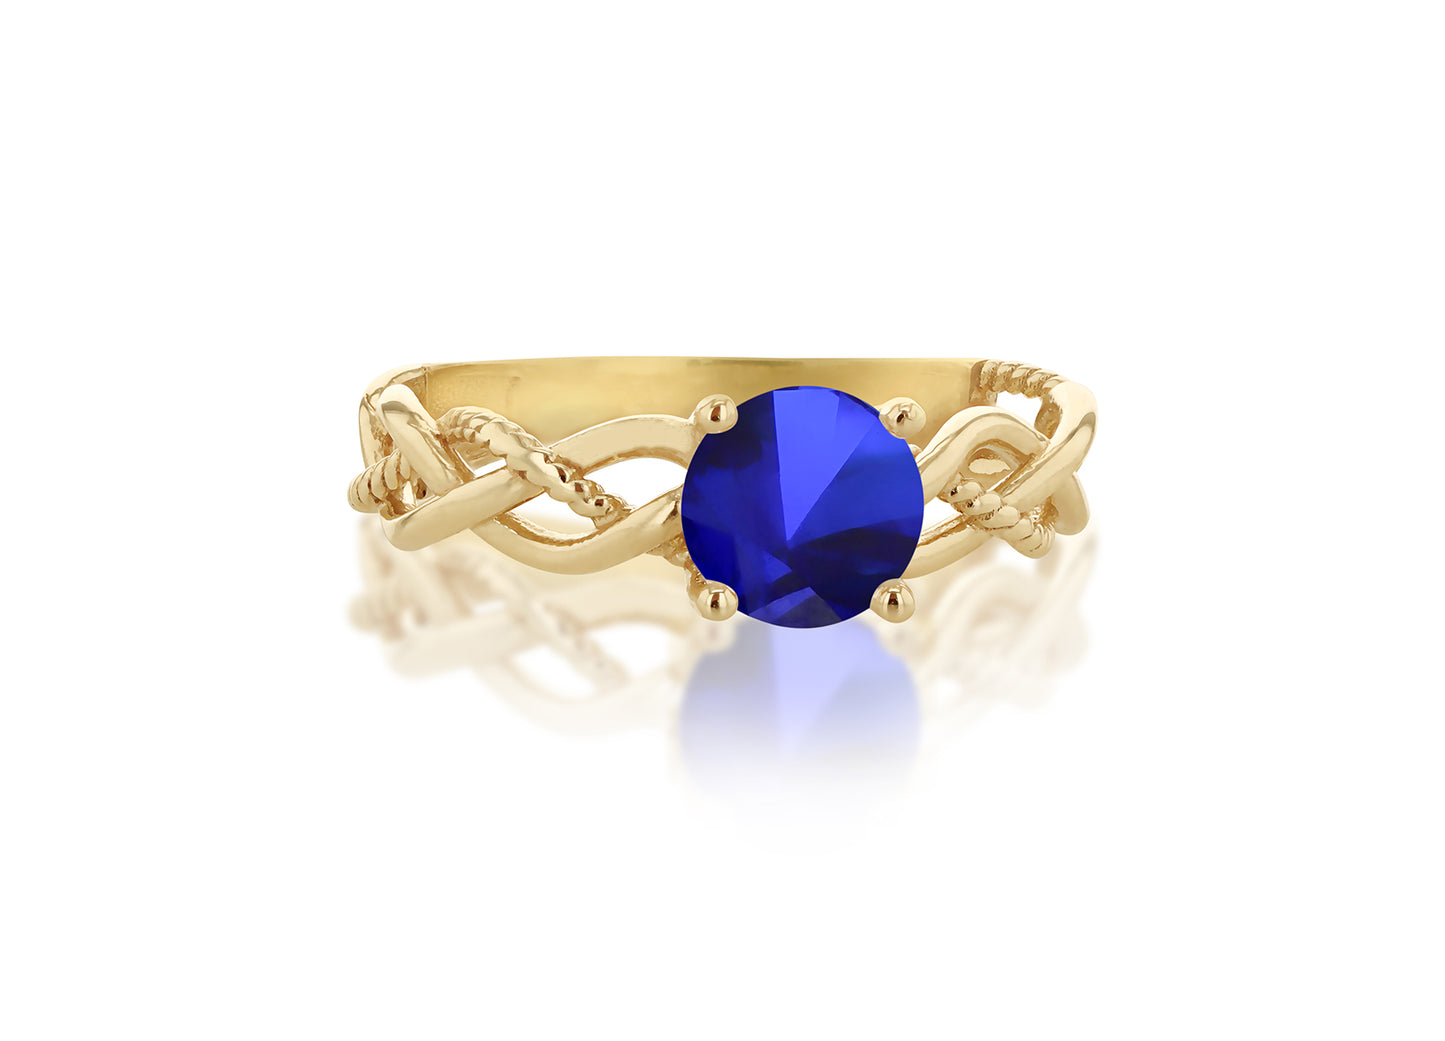 9ct Yellow Gold DC Plaited Band Blue CZ Ring